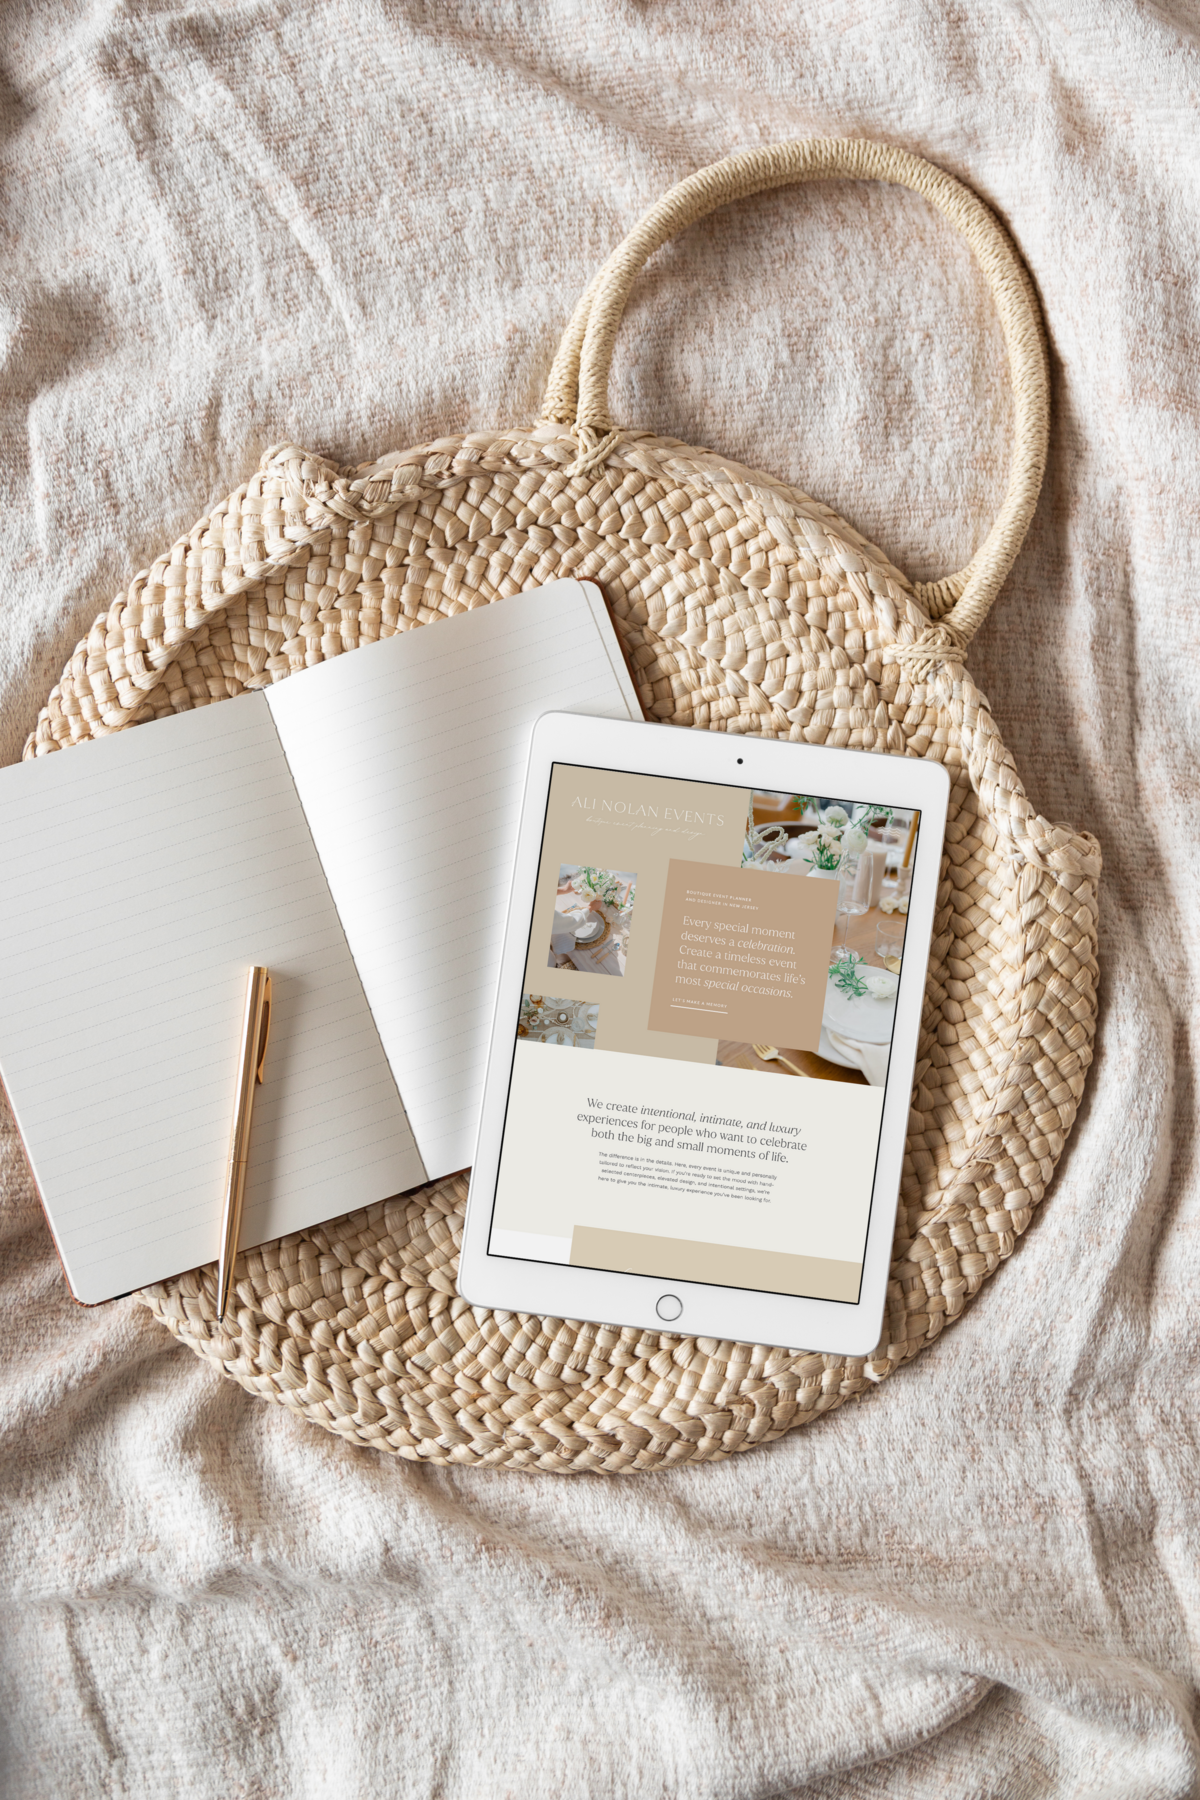 Ipad showcasing website page mockup against a open notebook with a golden pen resting by its side.